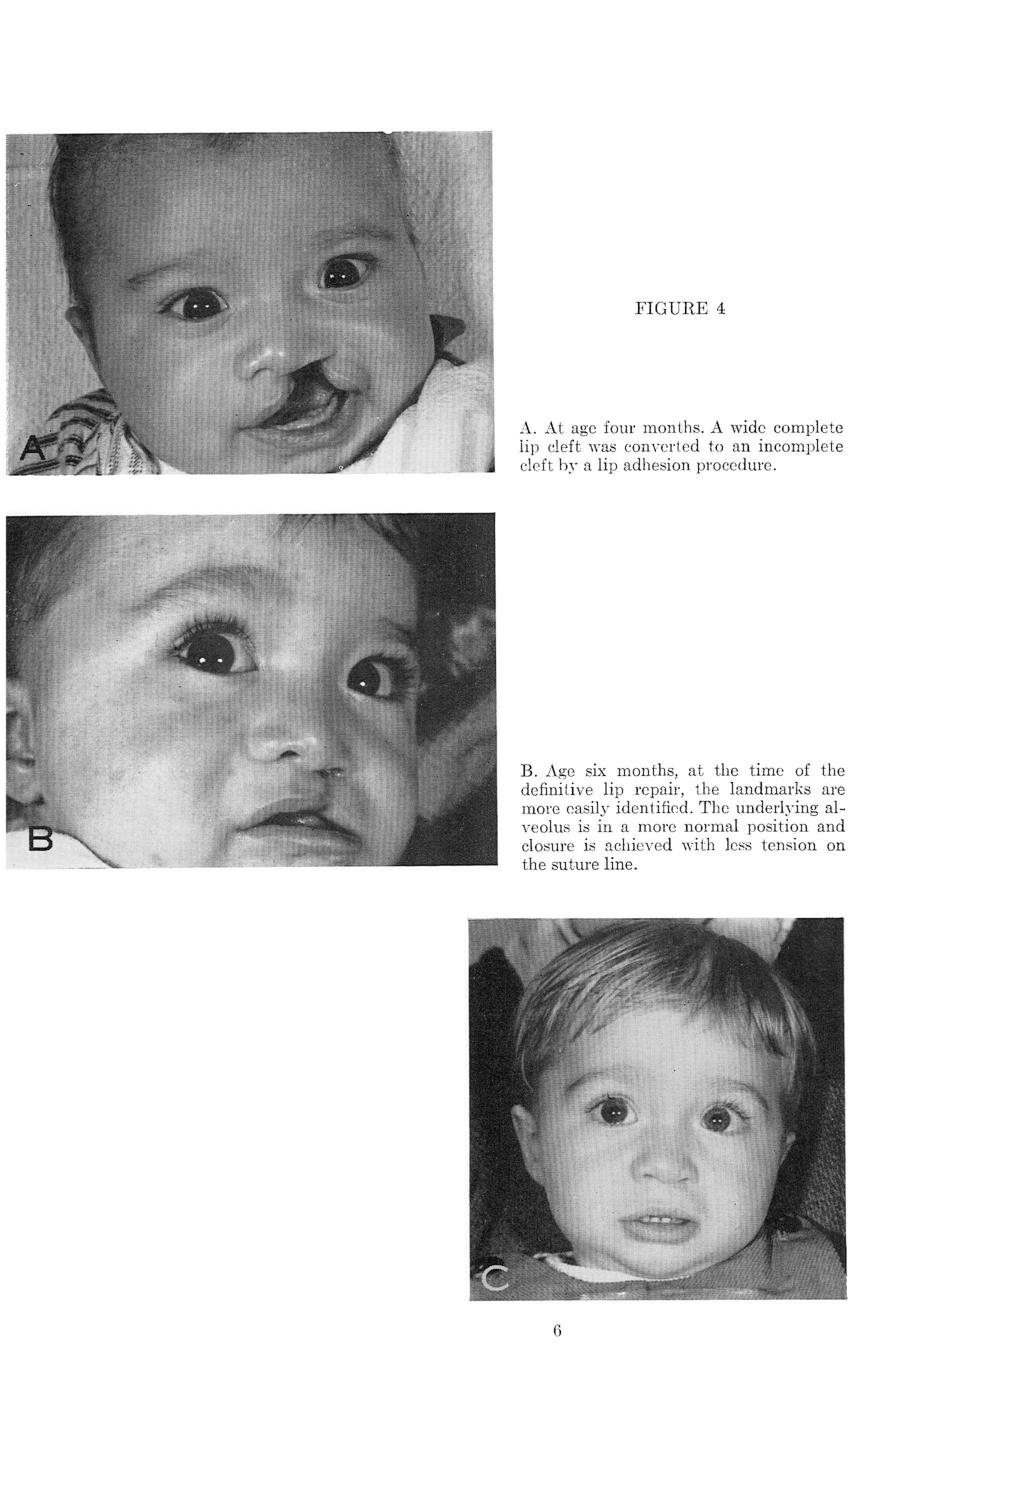 FIGURE 4 A. At age four months. A wide complete lip cleft was converted to an incomplete cleft by a lip adhesion procedure. B.